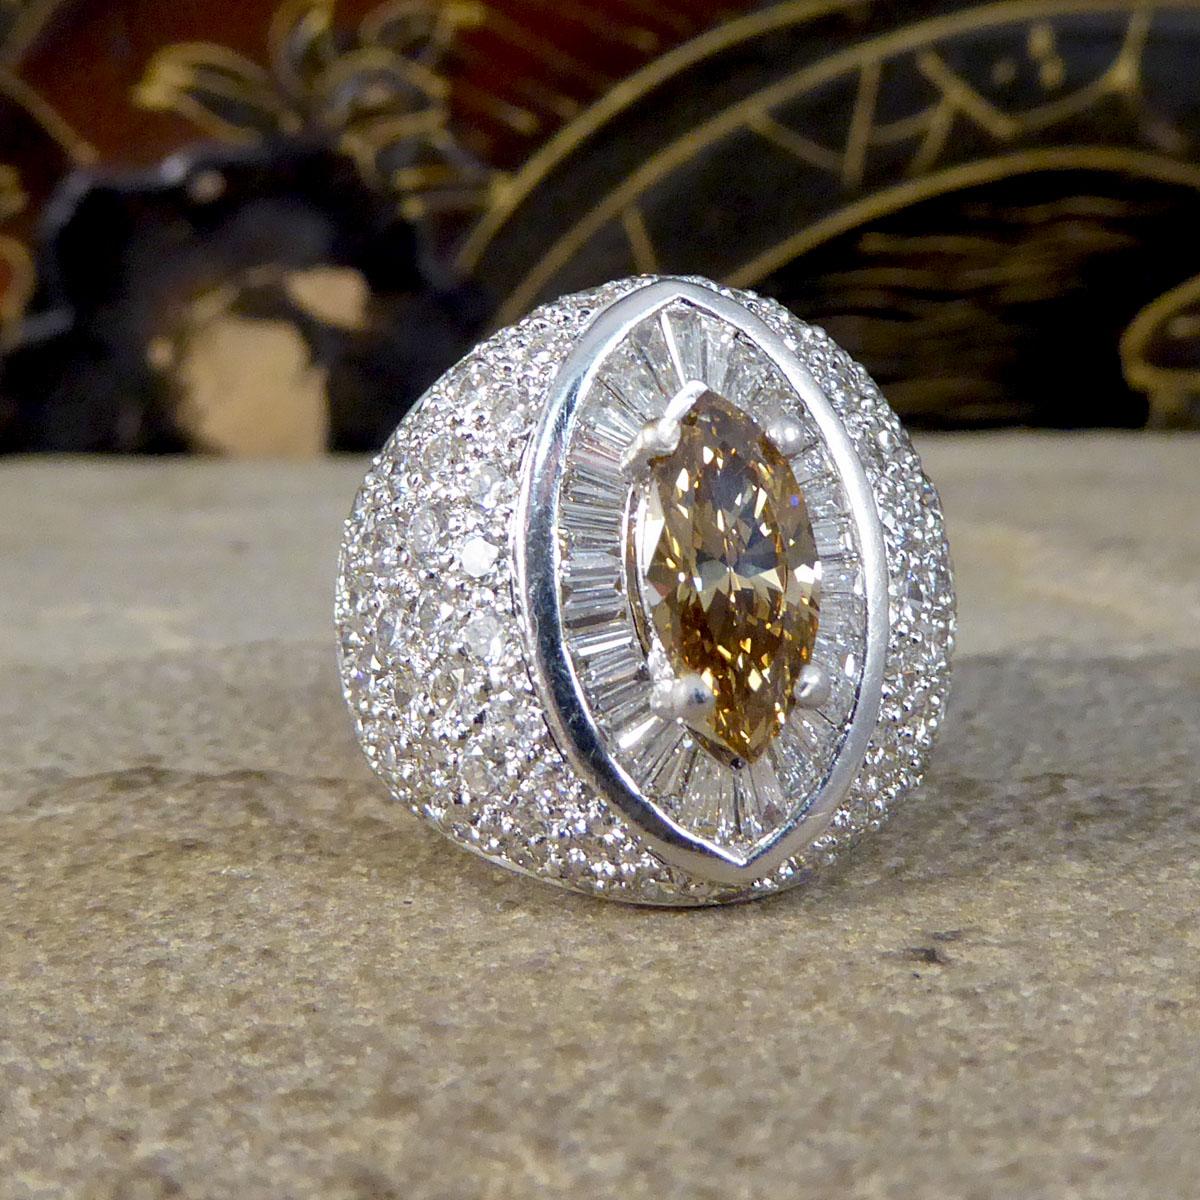 A contemporary Diamond cluster ring consisting os a centrally set Marquise Brilliant Cut medium light brown(Cognac) Diamond weighing 1.12ct. The Cognac Diamond has a surround of Baguette cut Diamonds creating an almost eye like design with a border